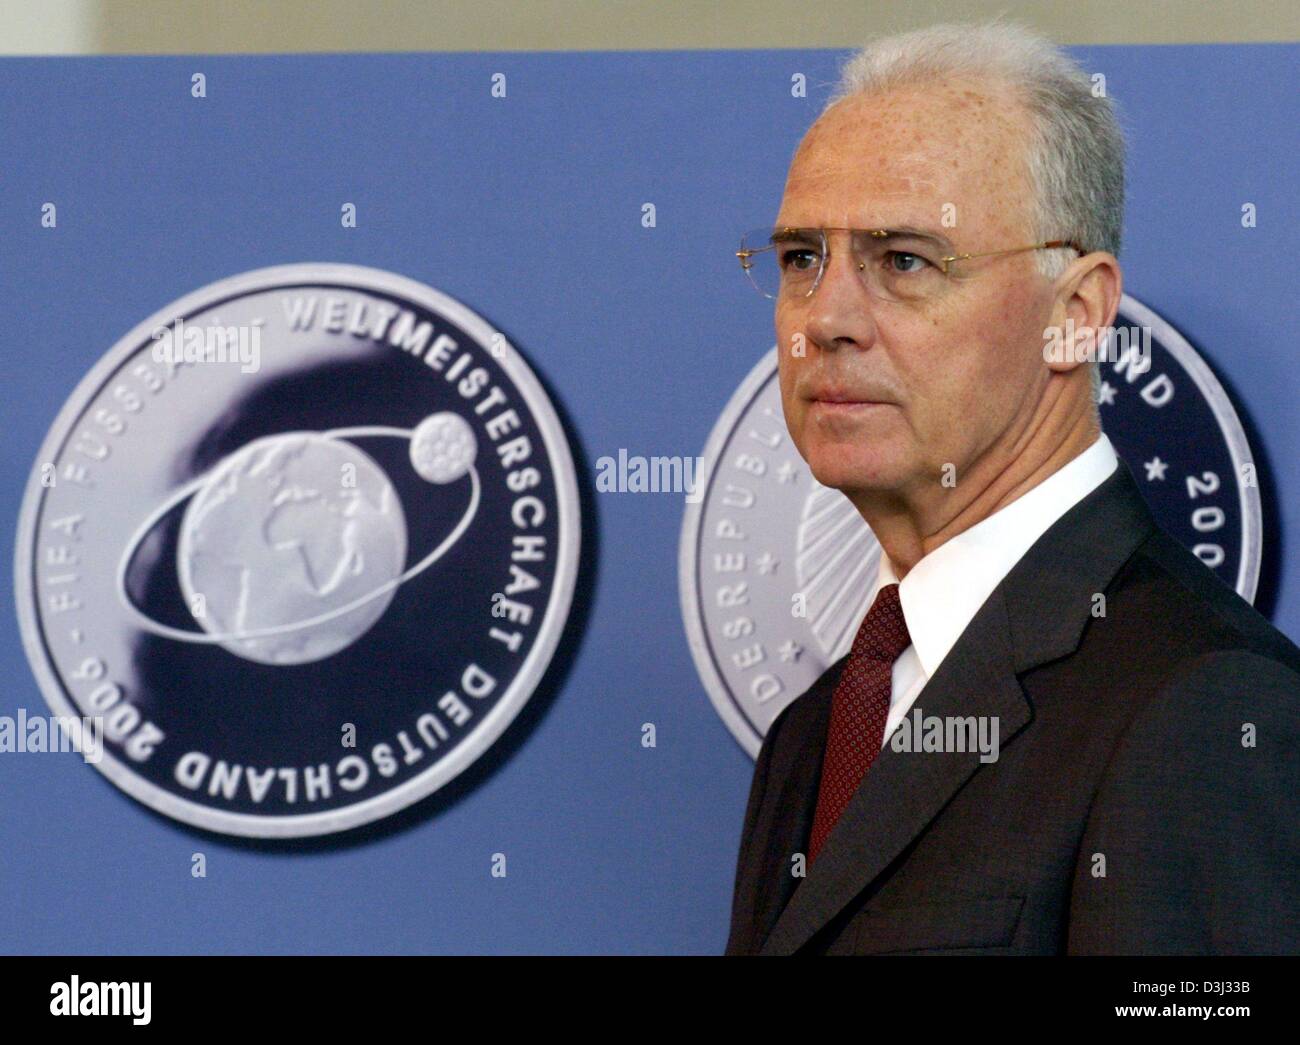 (dpa) - Franz Beckenbauer, president of the organising committee of the FIFA World Cup 2006 in Germany, stands in front of an enlarged print of a ten euro coin at the Chancellory in Berlin, 4 February 2004. The coins are special editions which are issued for the 2006 Soccer World Cup. Beckenbauer introduced the coin and special stamps as novelties on the occasion of the various spo Stock Photo